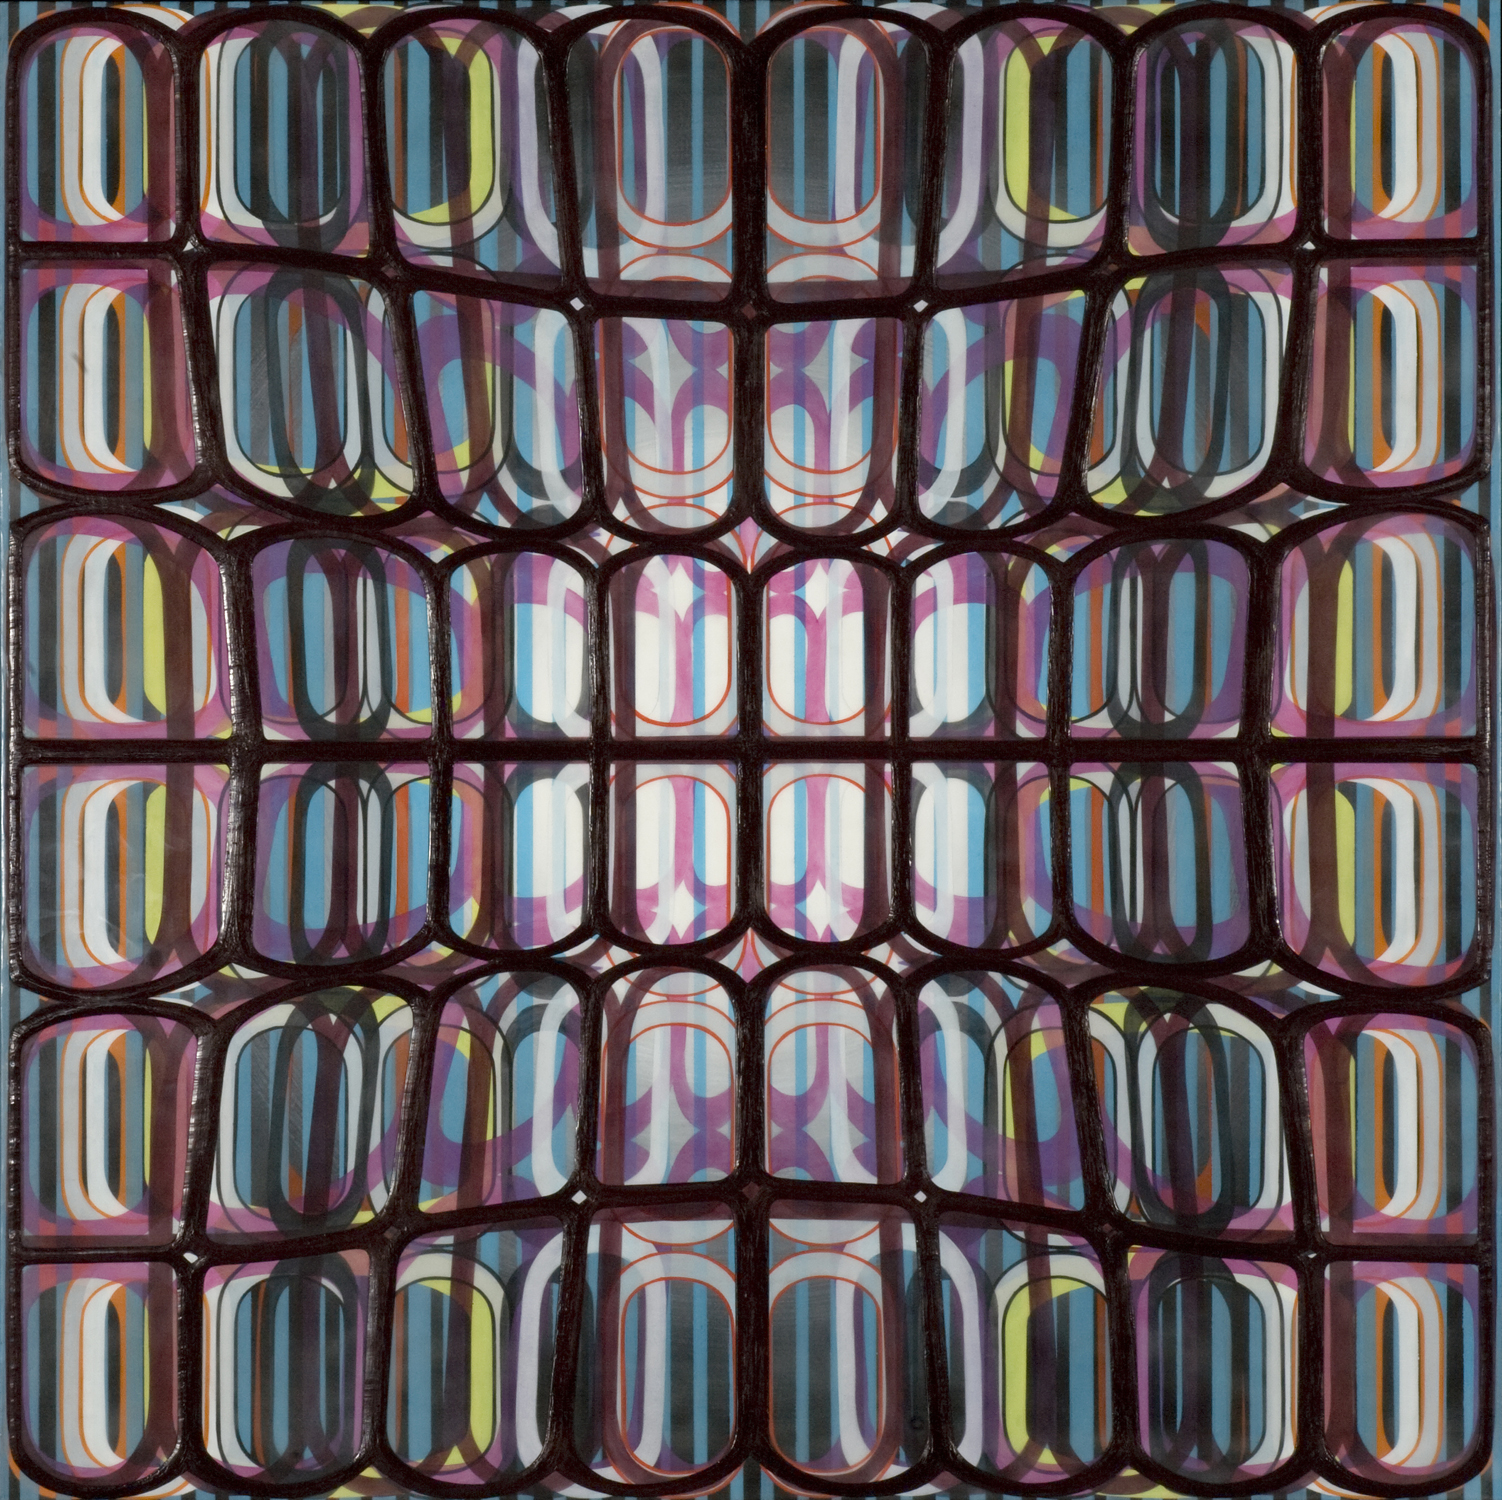   Identical/Variation (pink, blue, green, black) #3,  2007 Oil and encaustic on panel 36 x 36 inches 